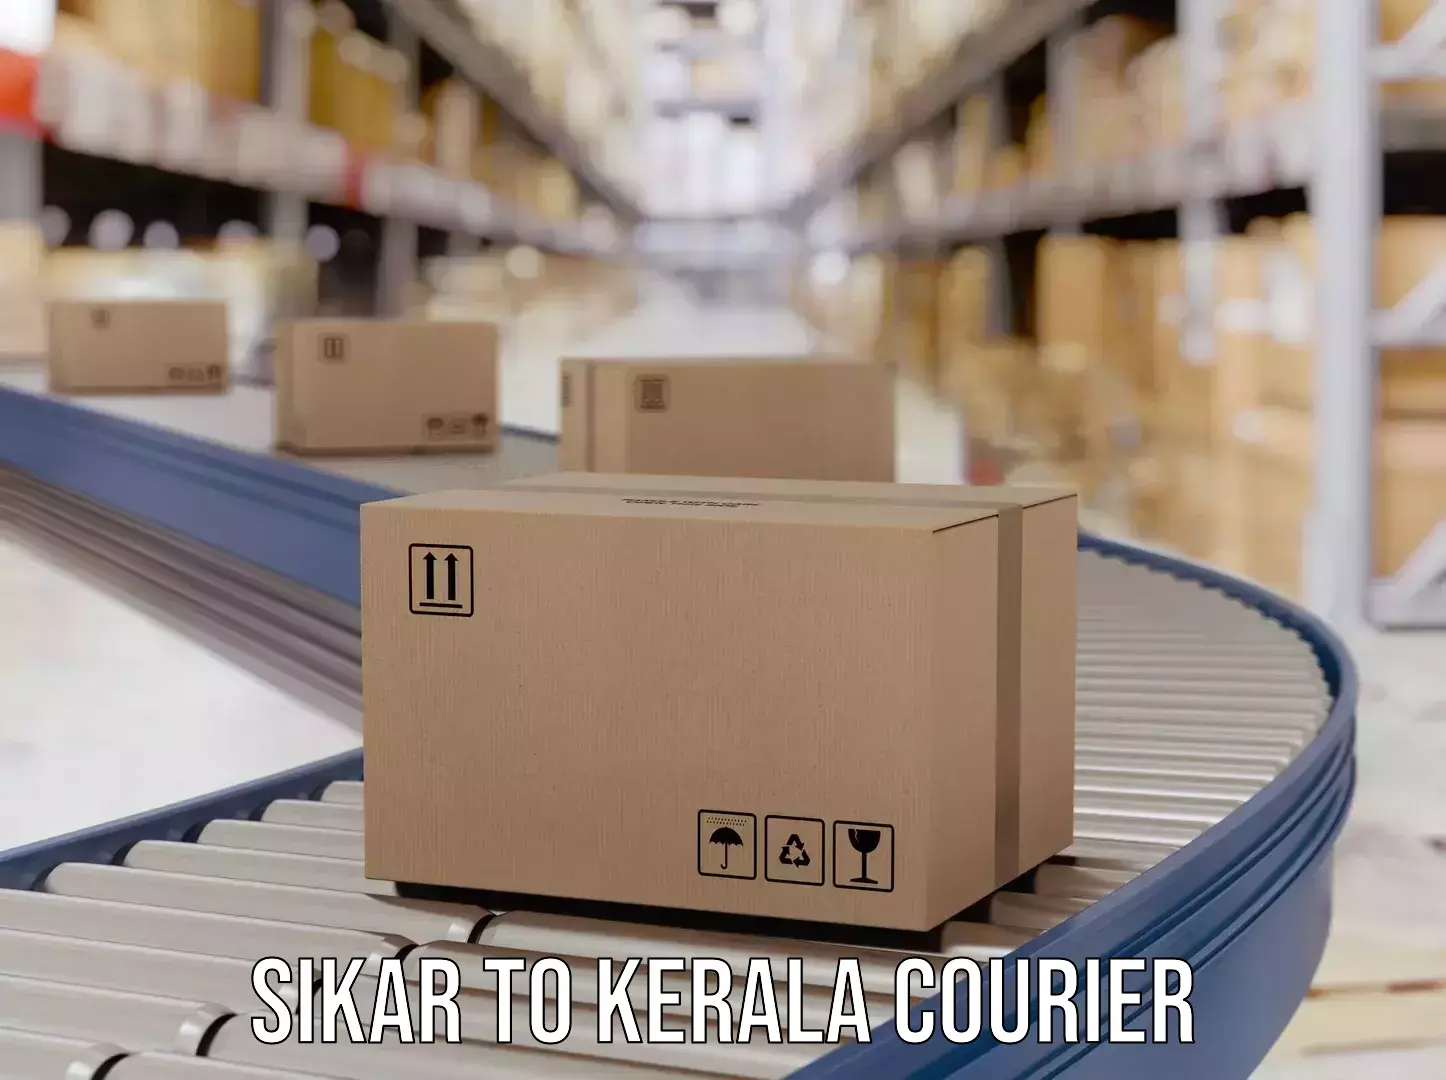 Fast shipping solutions Sikar to Kannur